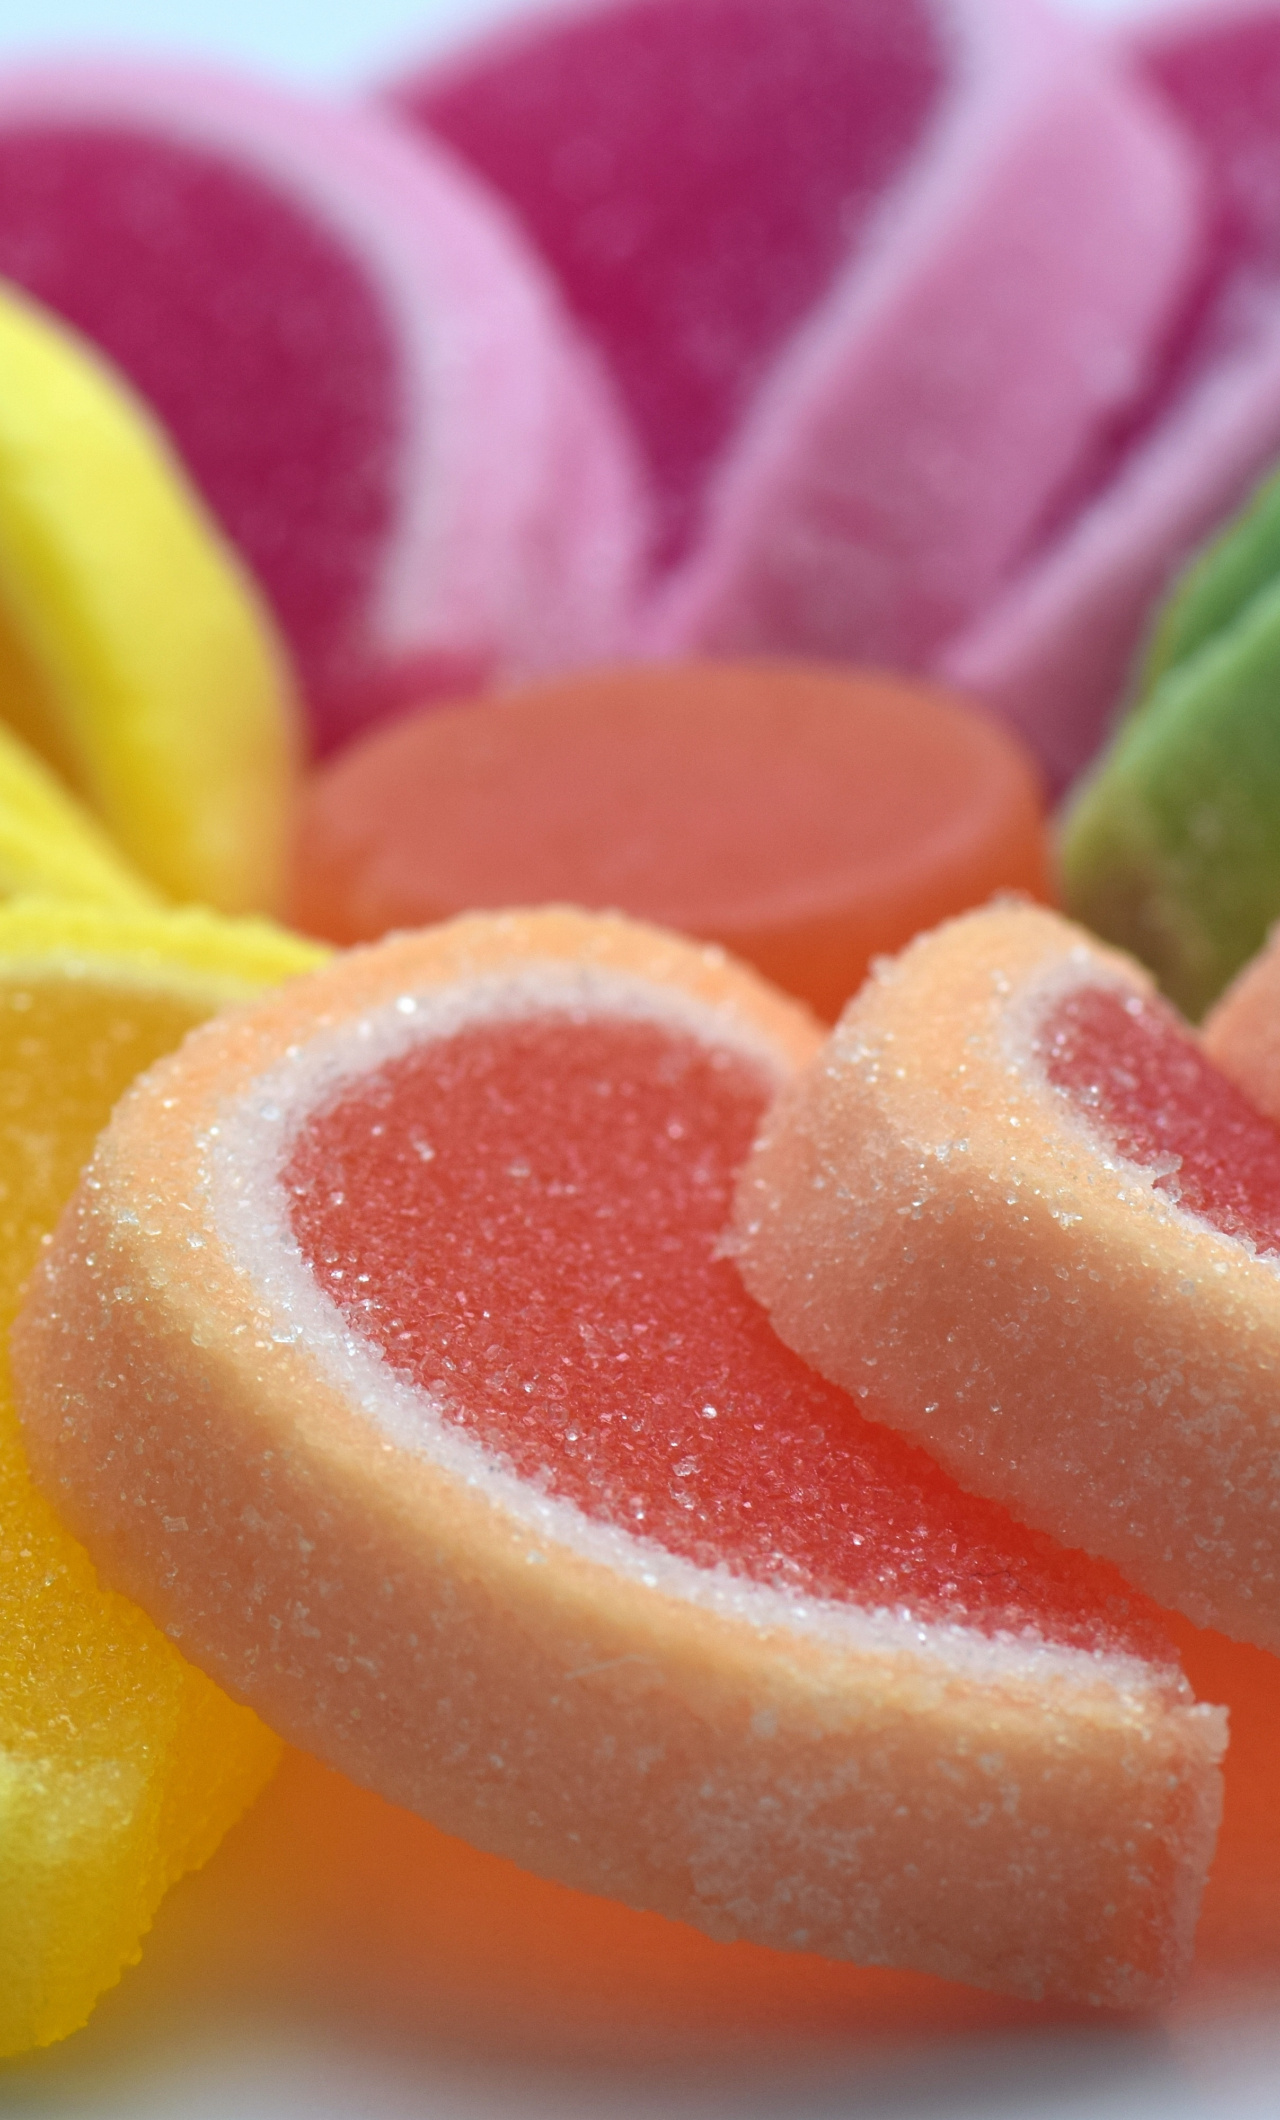 Sugar, Candies, Sweets, Colorful, Wallpaper - Sweets - HD Wallpaper 